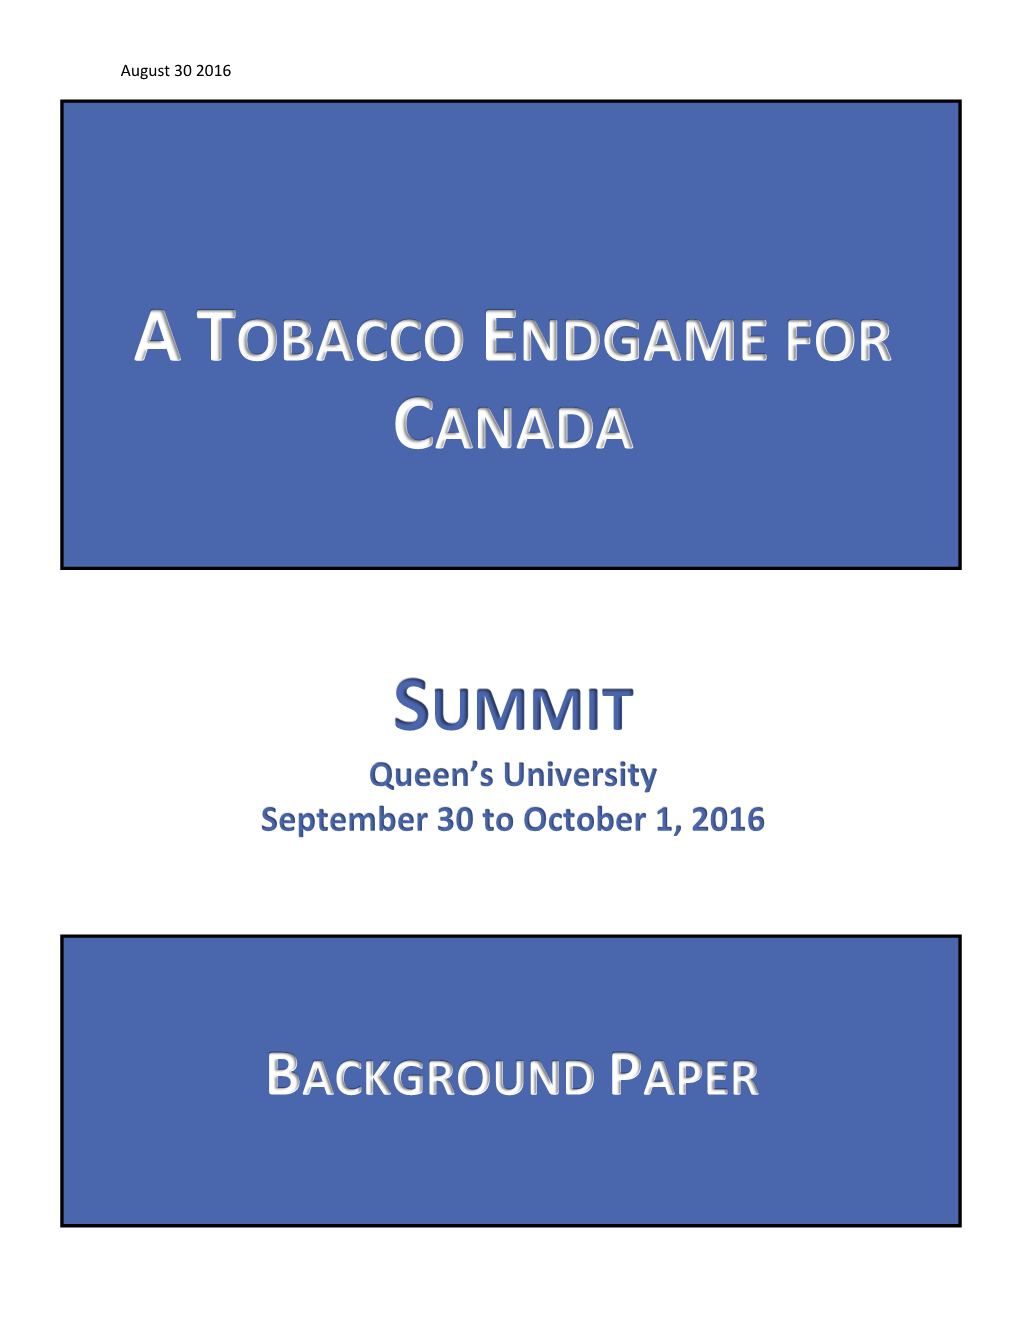 A Tobacco Endgame for Canada: Summit Background Paper